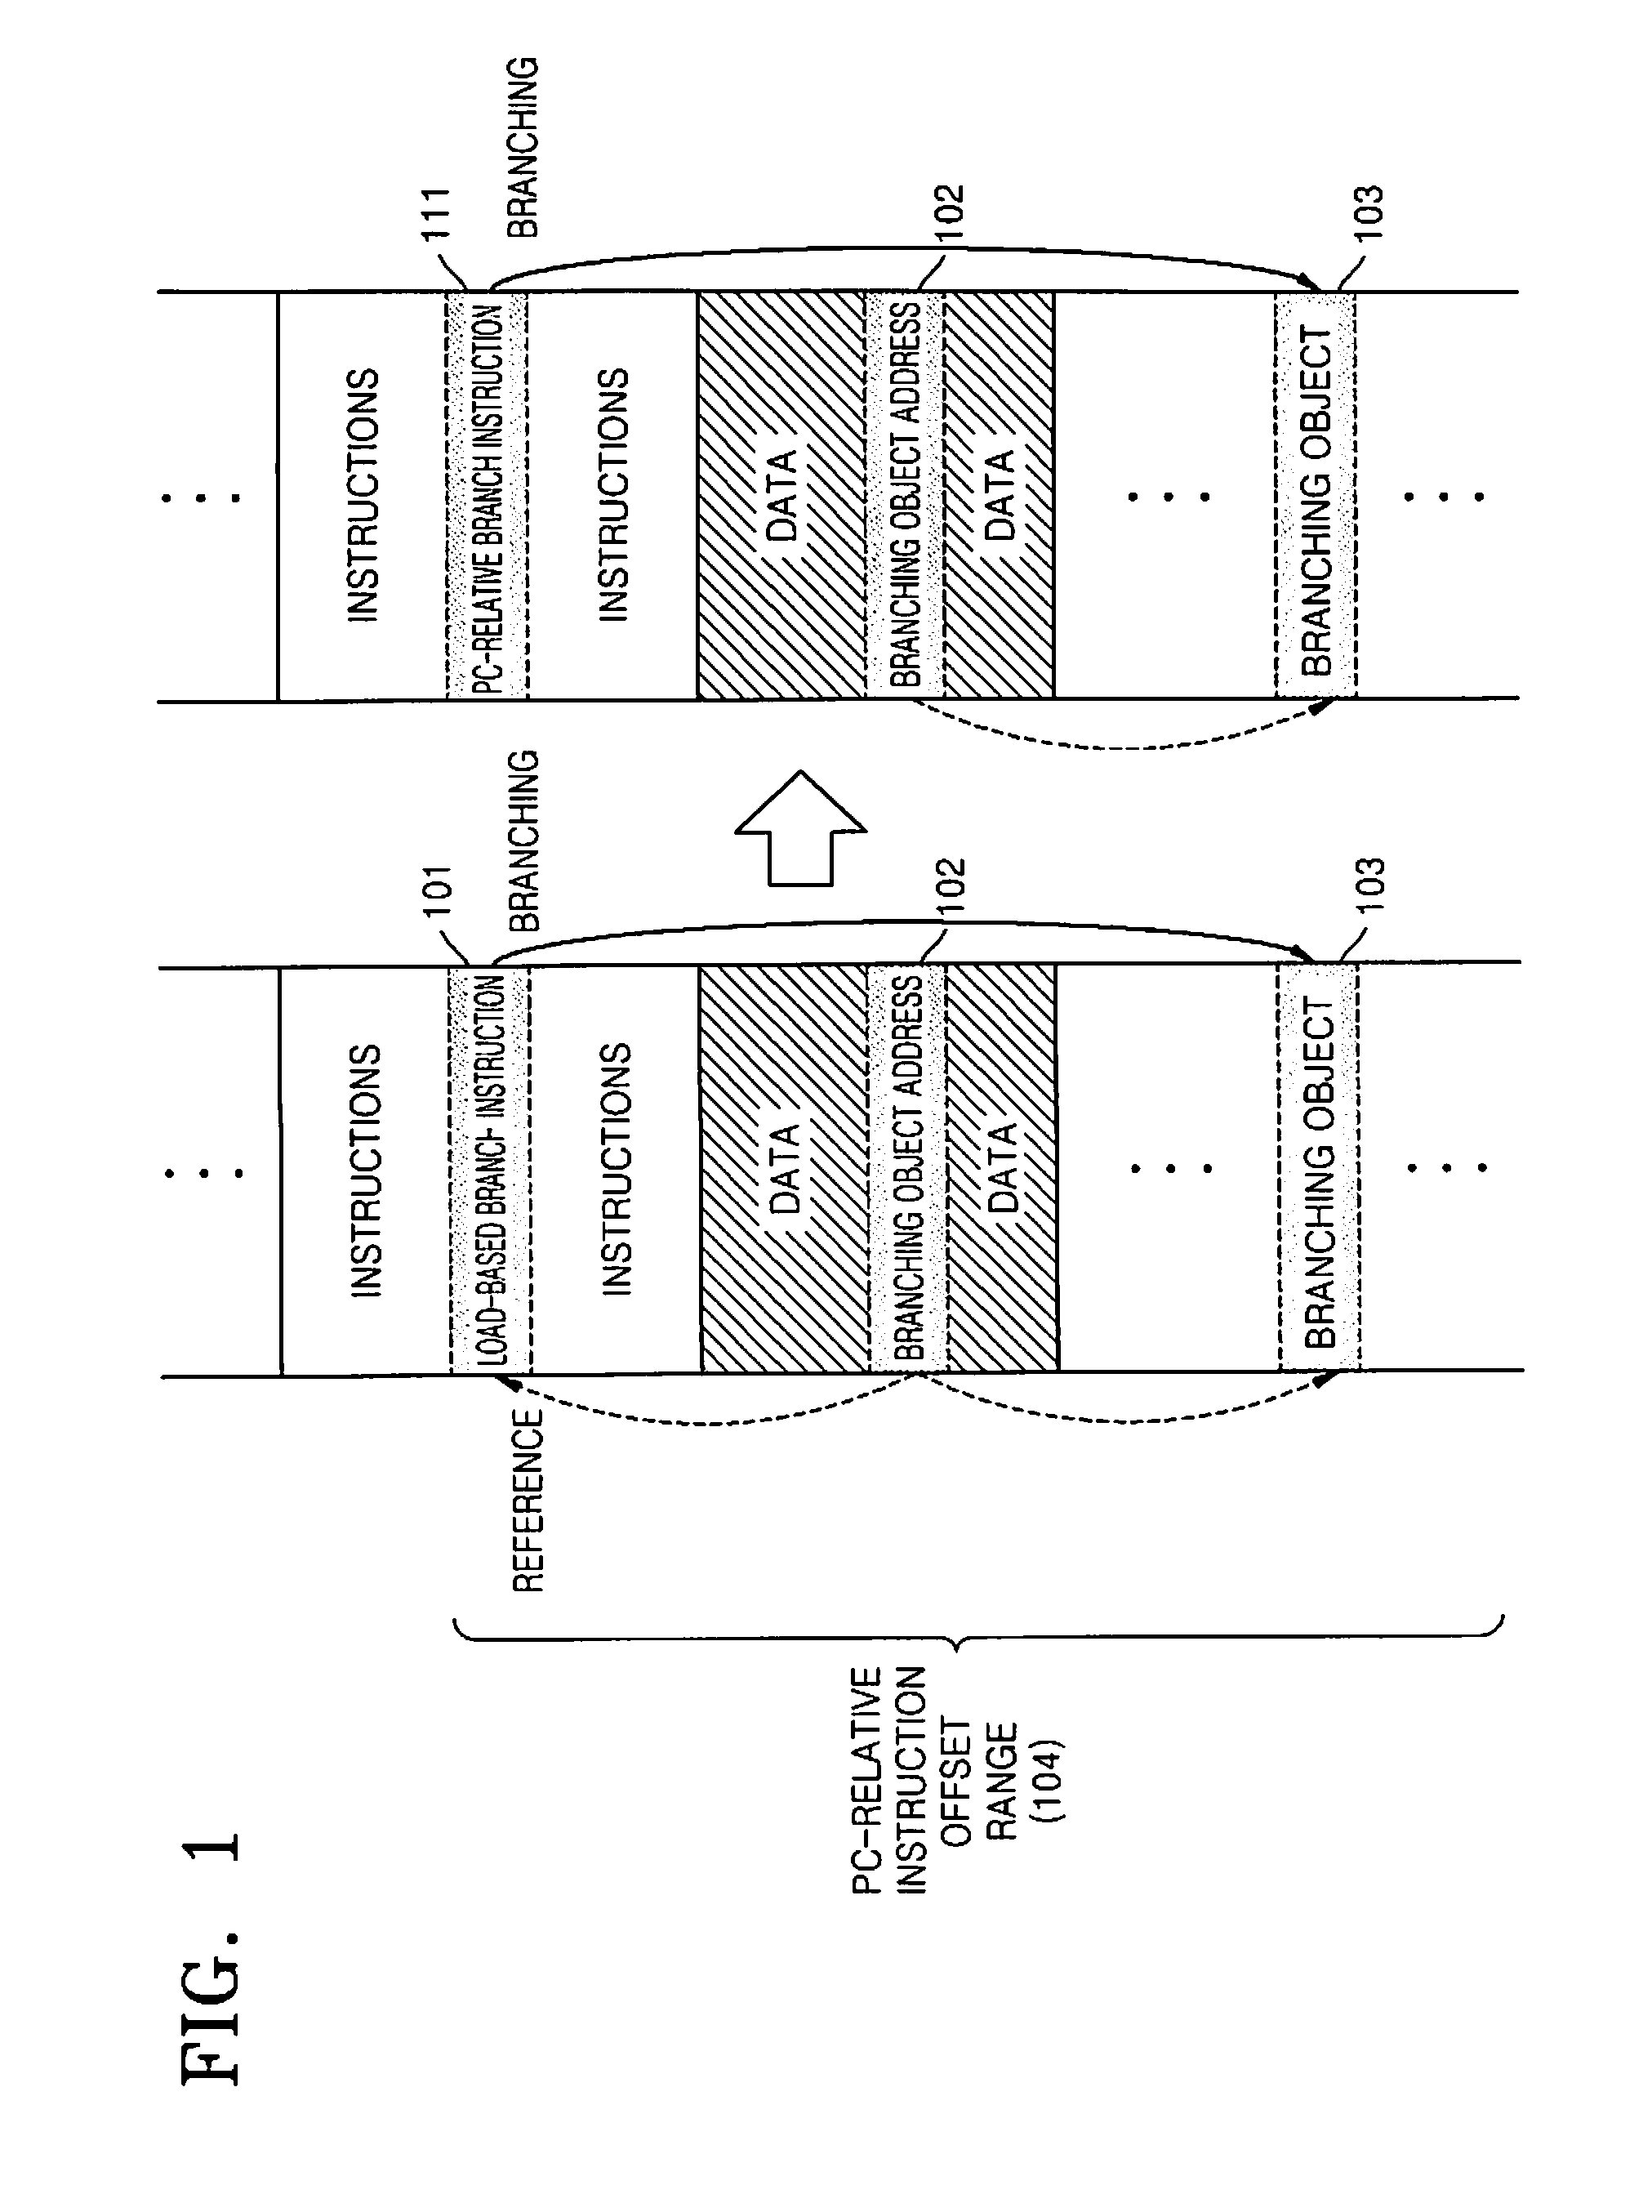 Method and apparatus for dynamically generating machine code